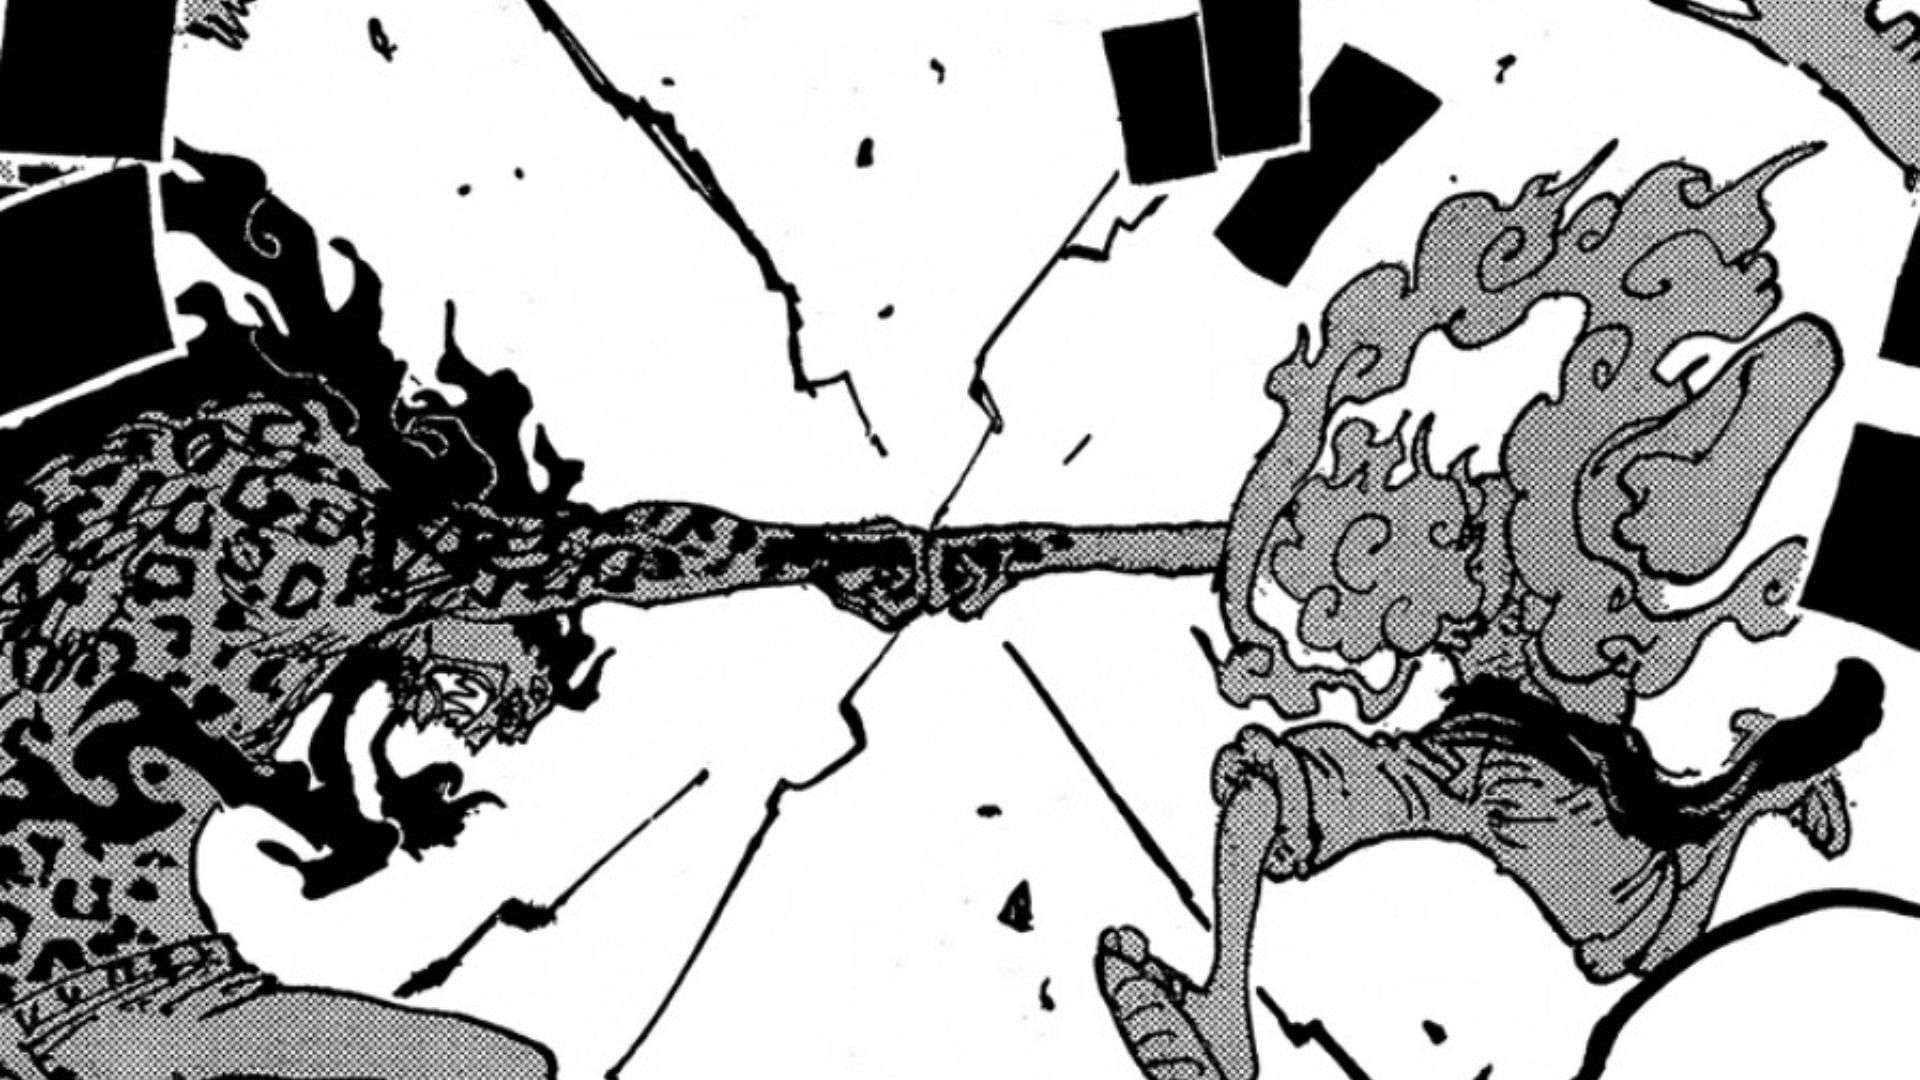 One Piece Chapter 1070